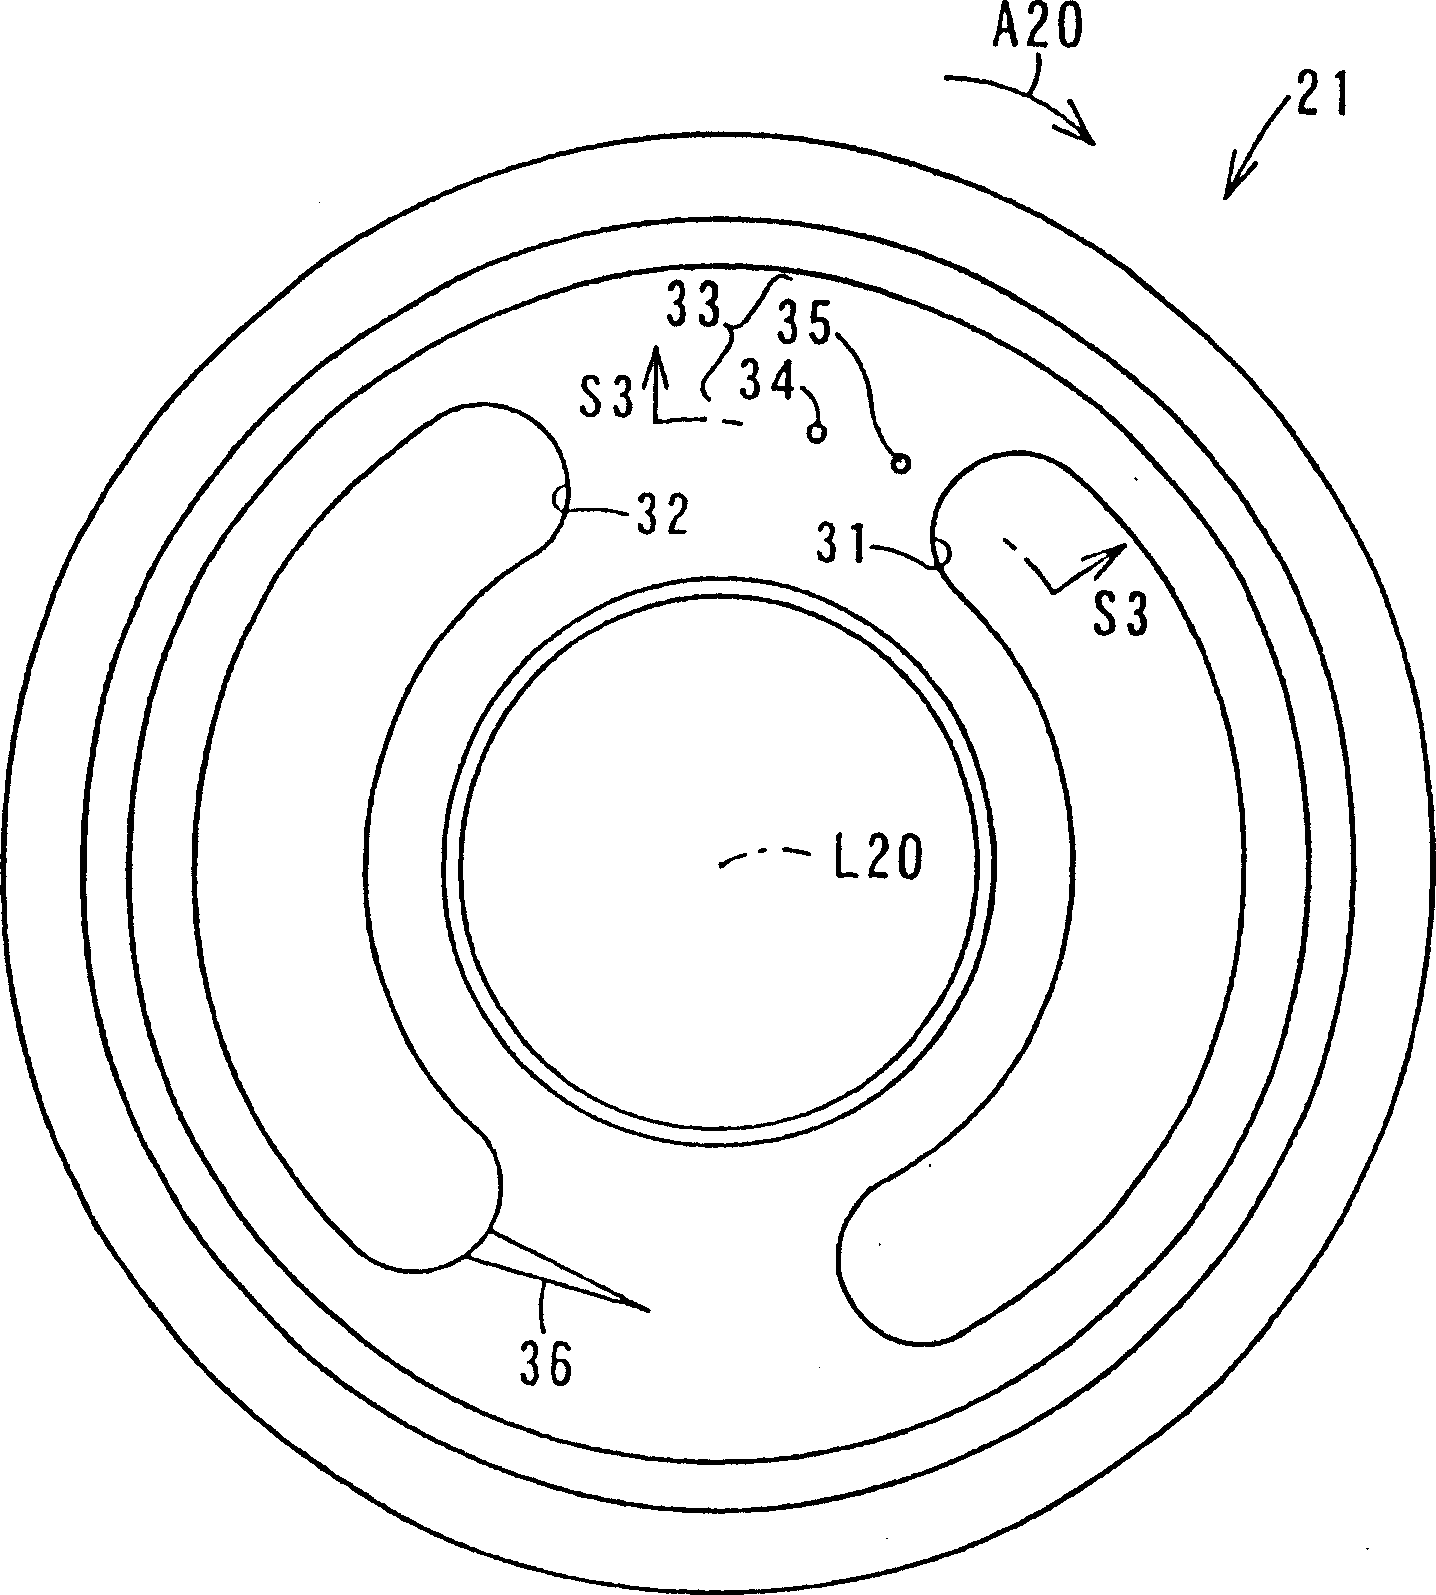 Valve plate and hydraulic apparatus with the same